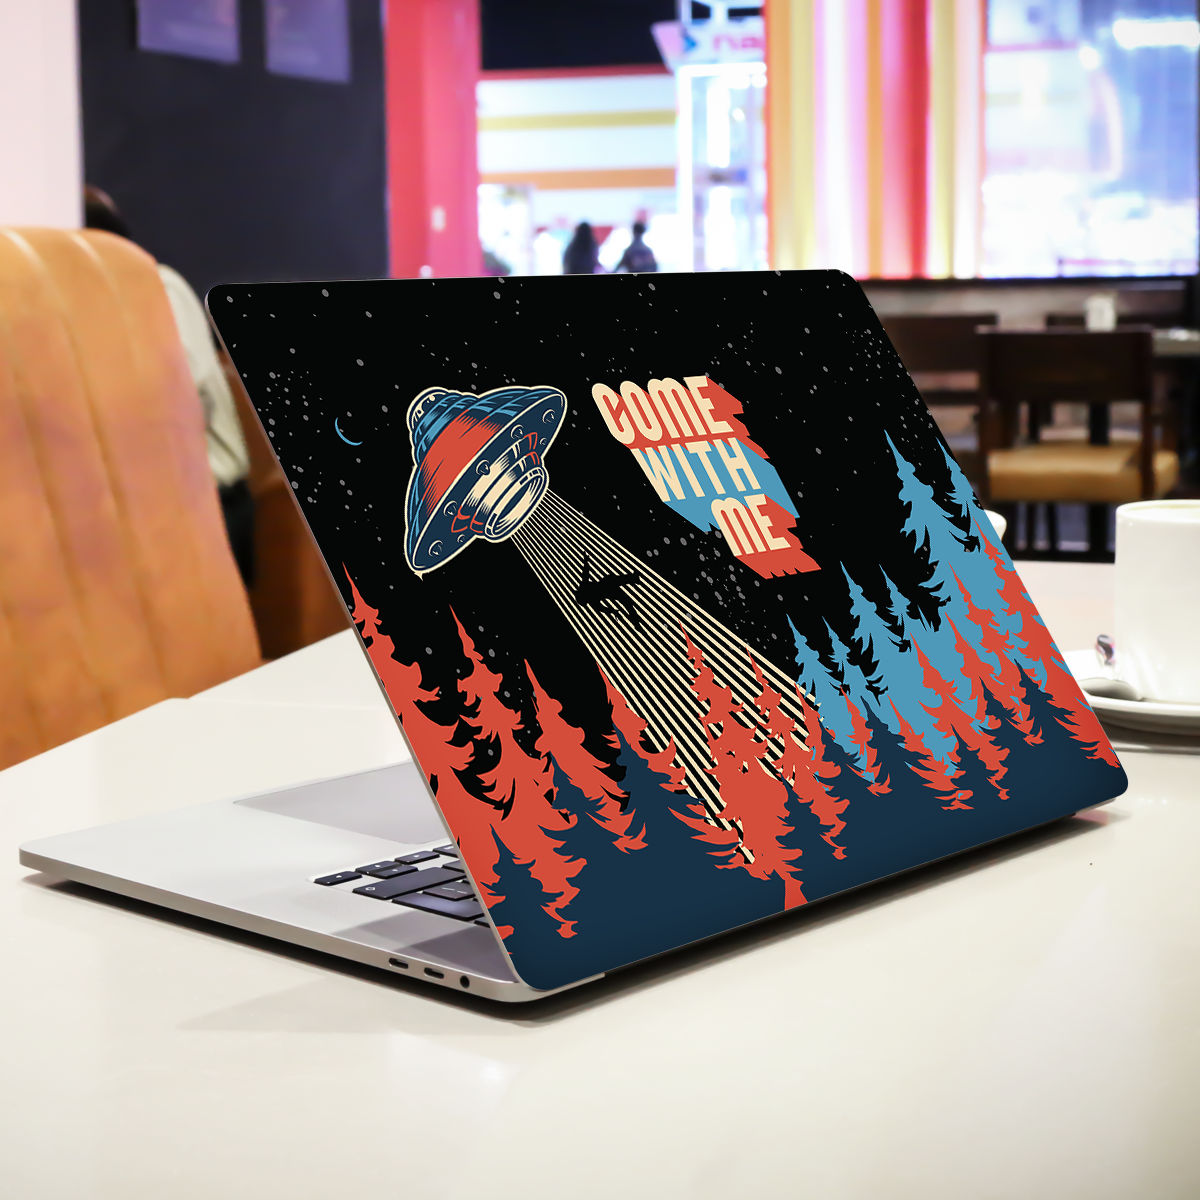 Come With Me Laptop Skin